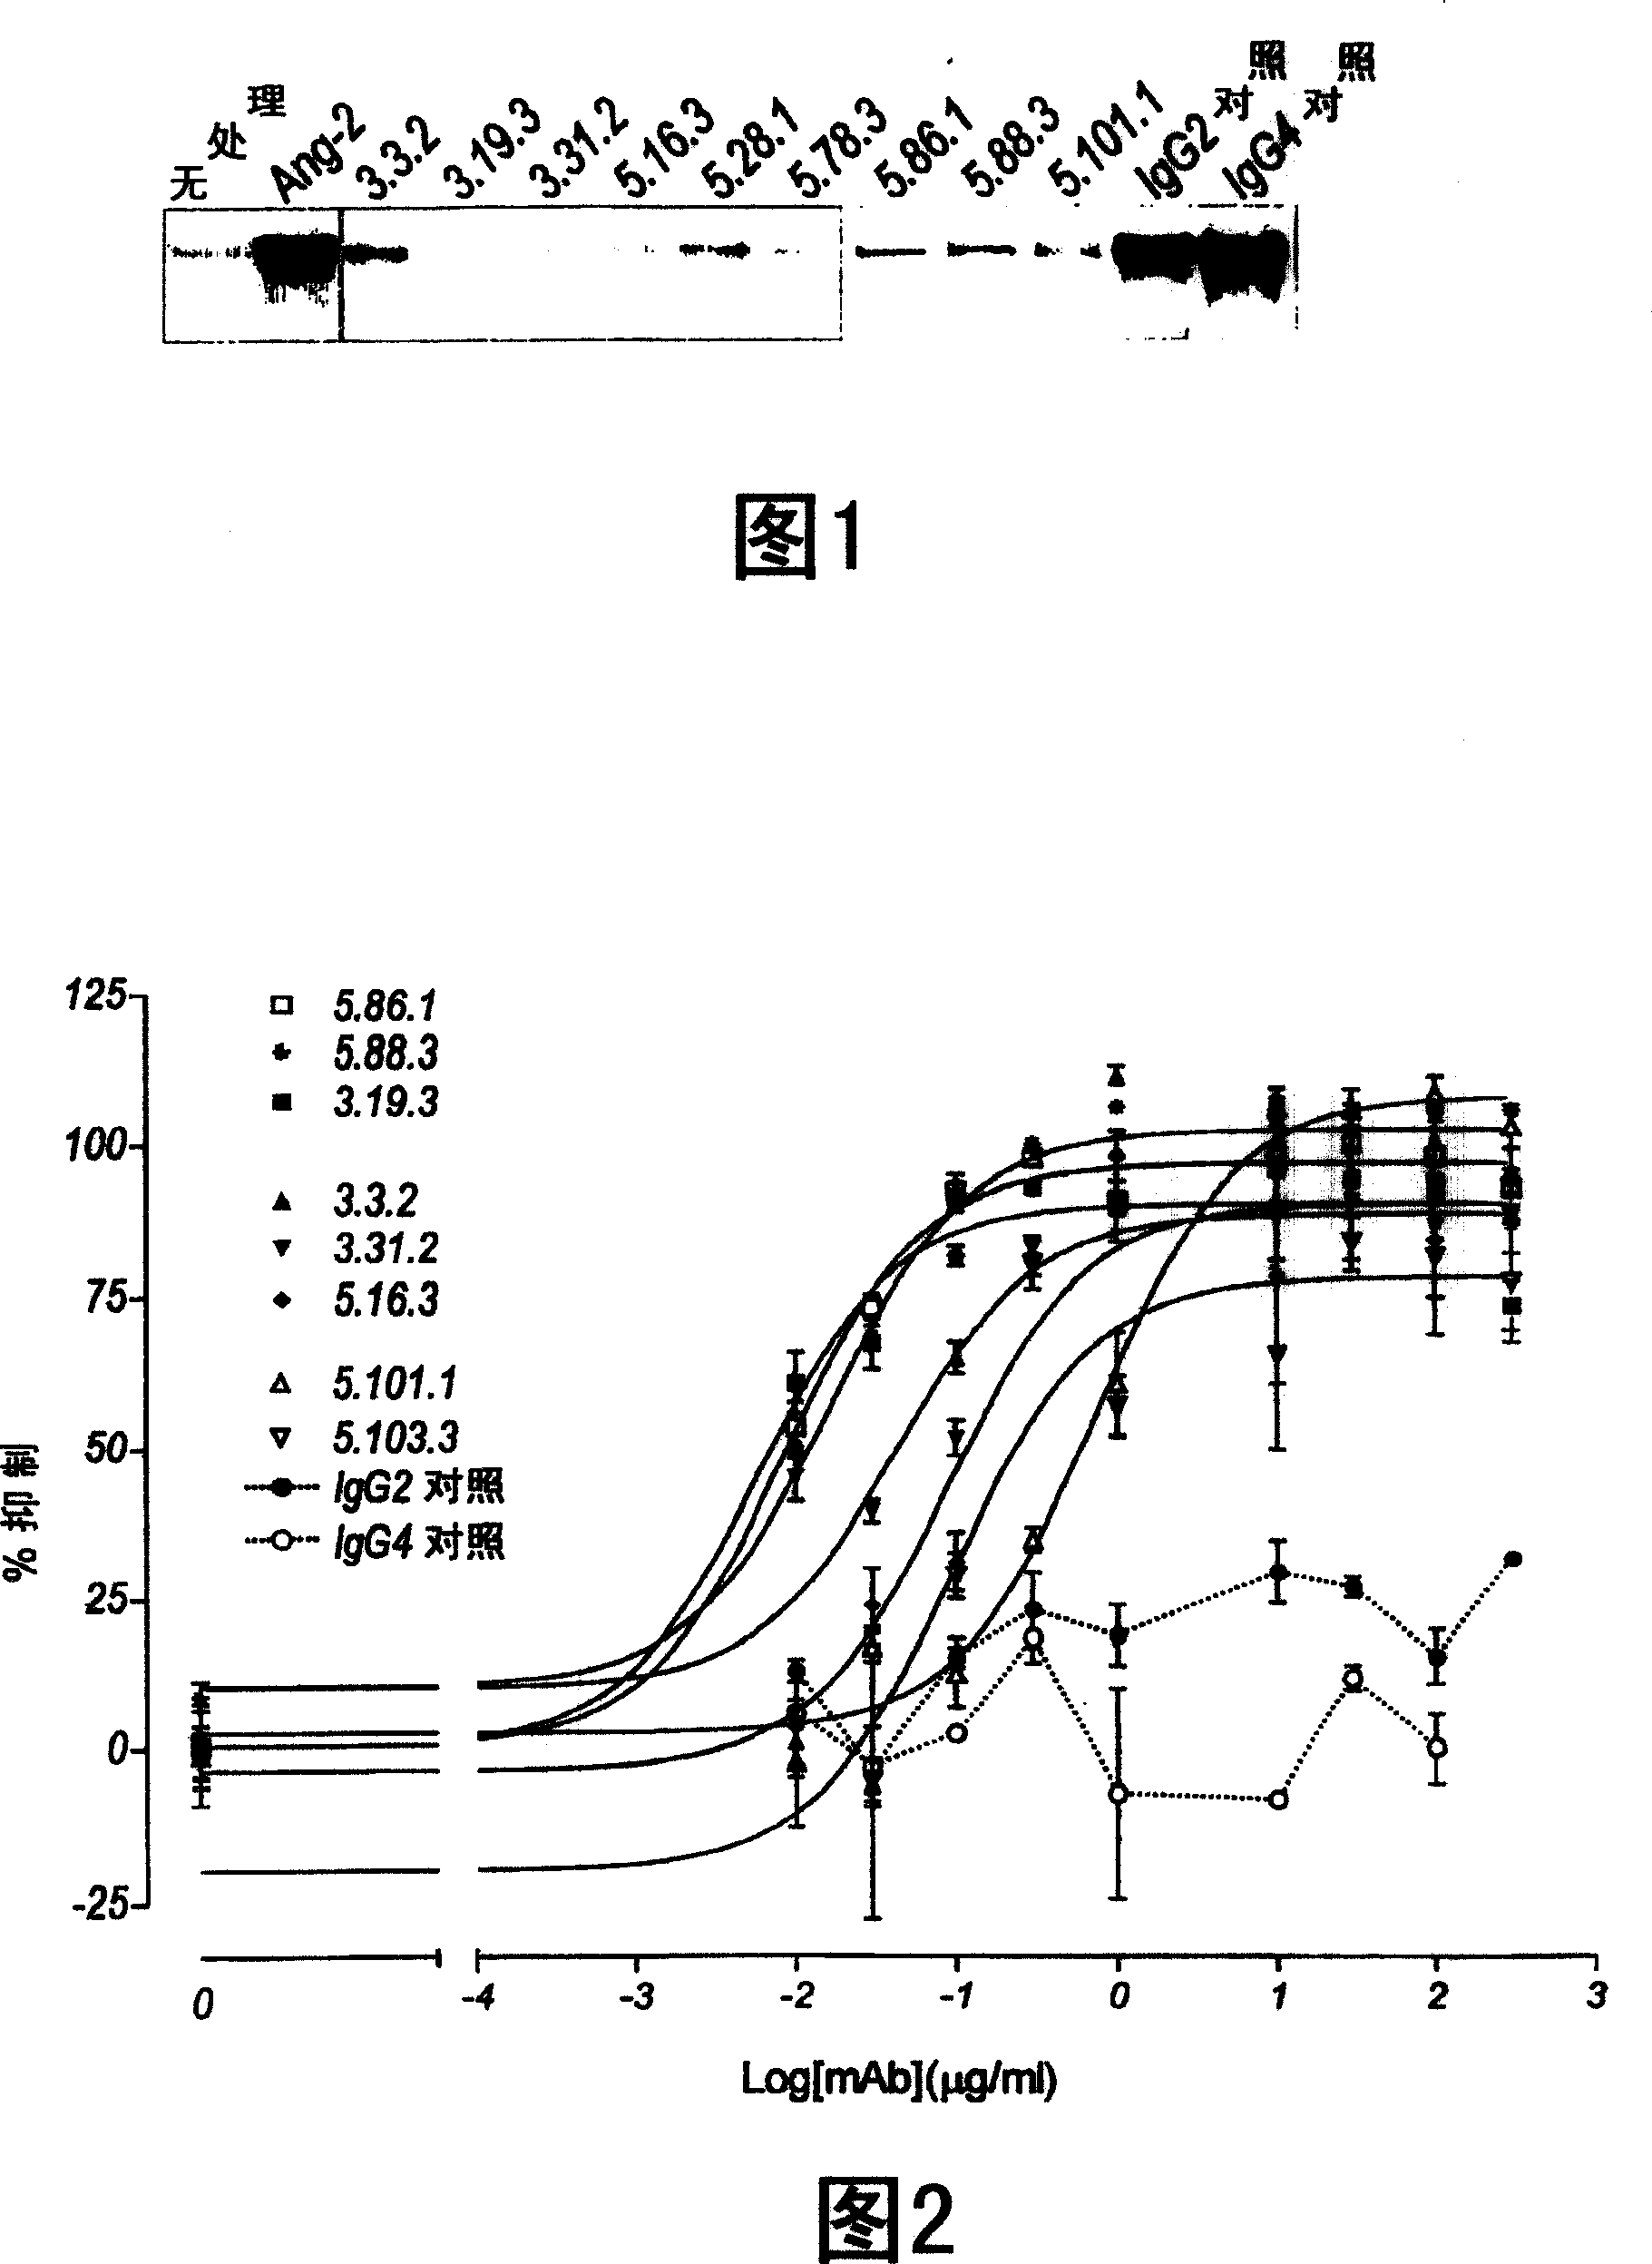 Antibodies directed to angiopoietin-2 and uses thereof